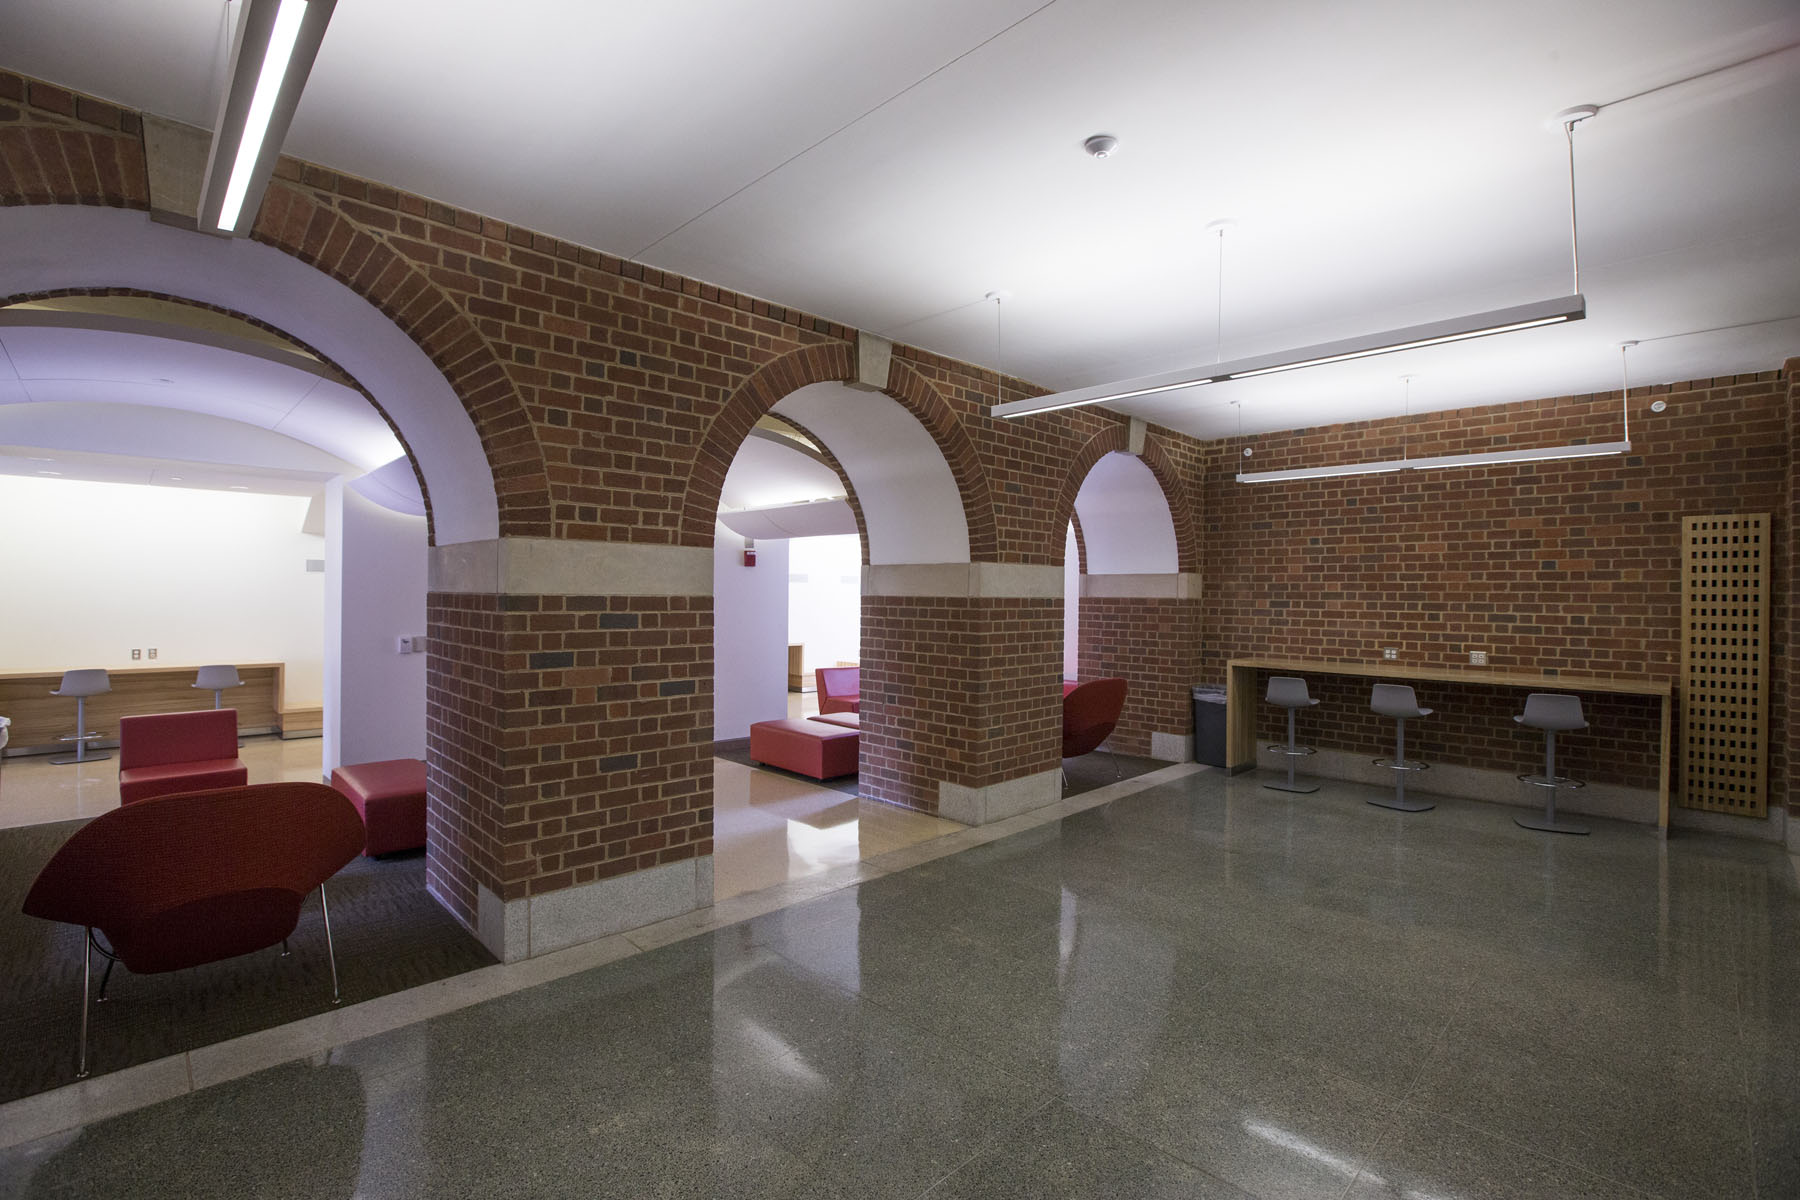 Brick arches in New Cabell Hall